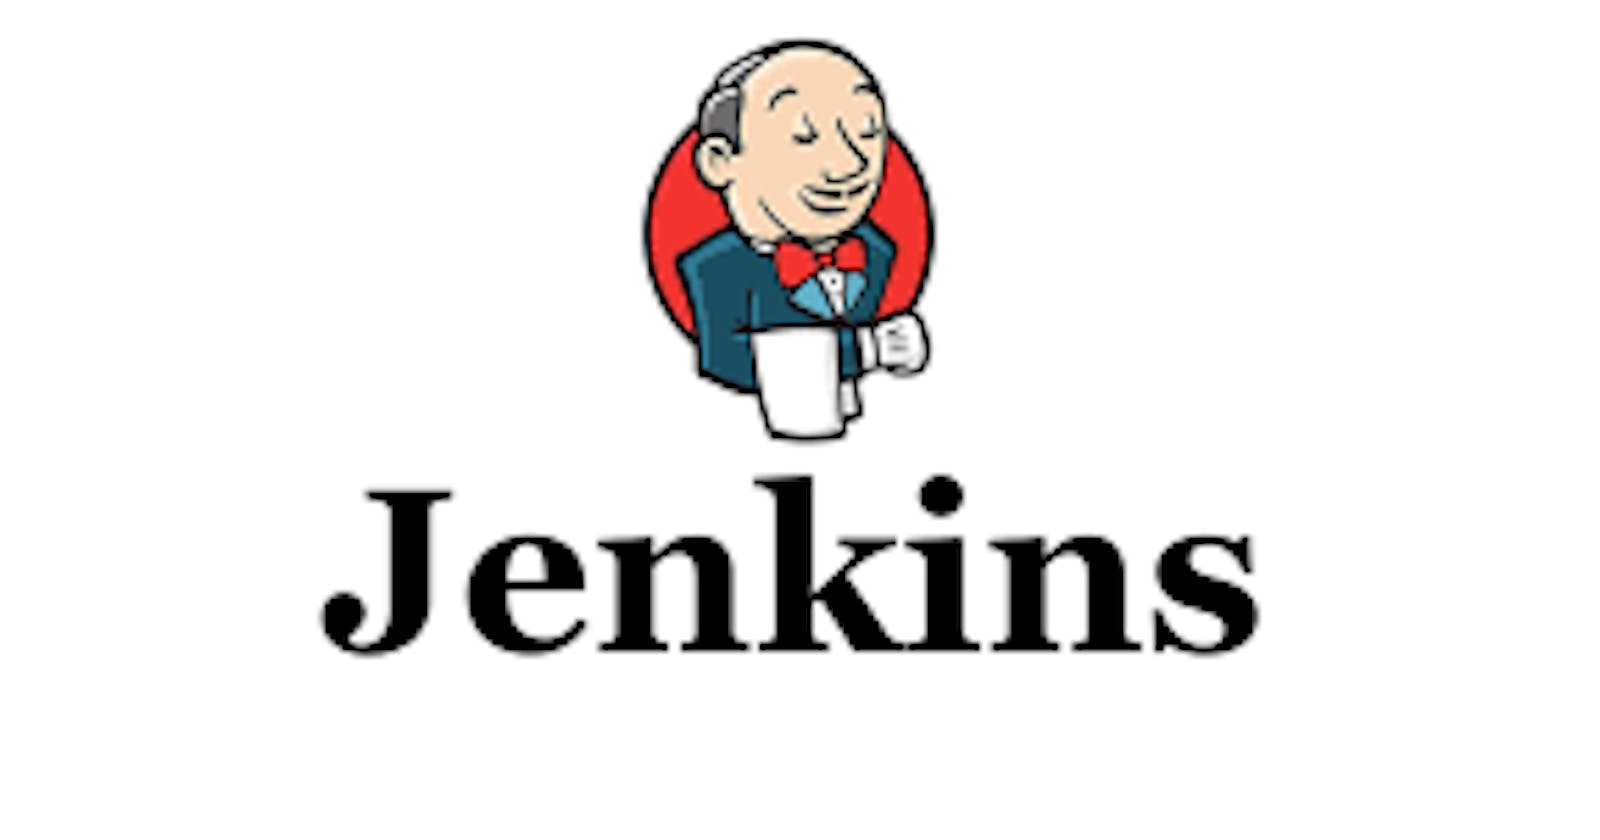 Day 23- More about Jenkins